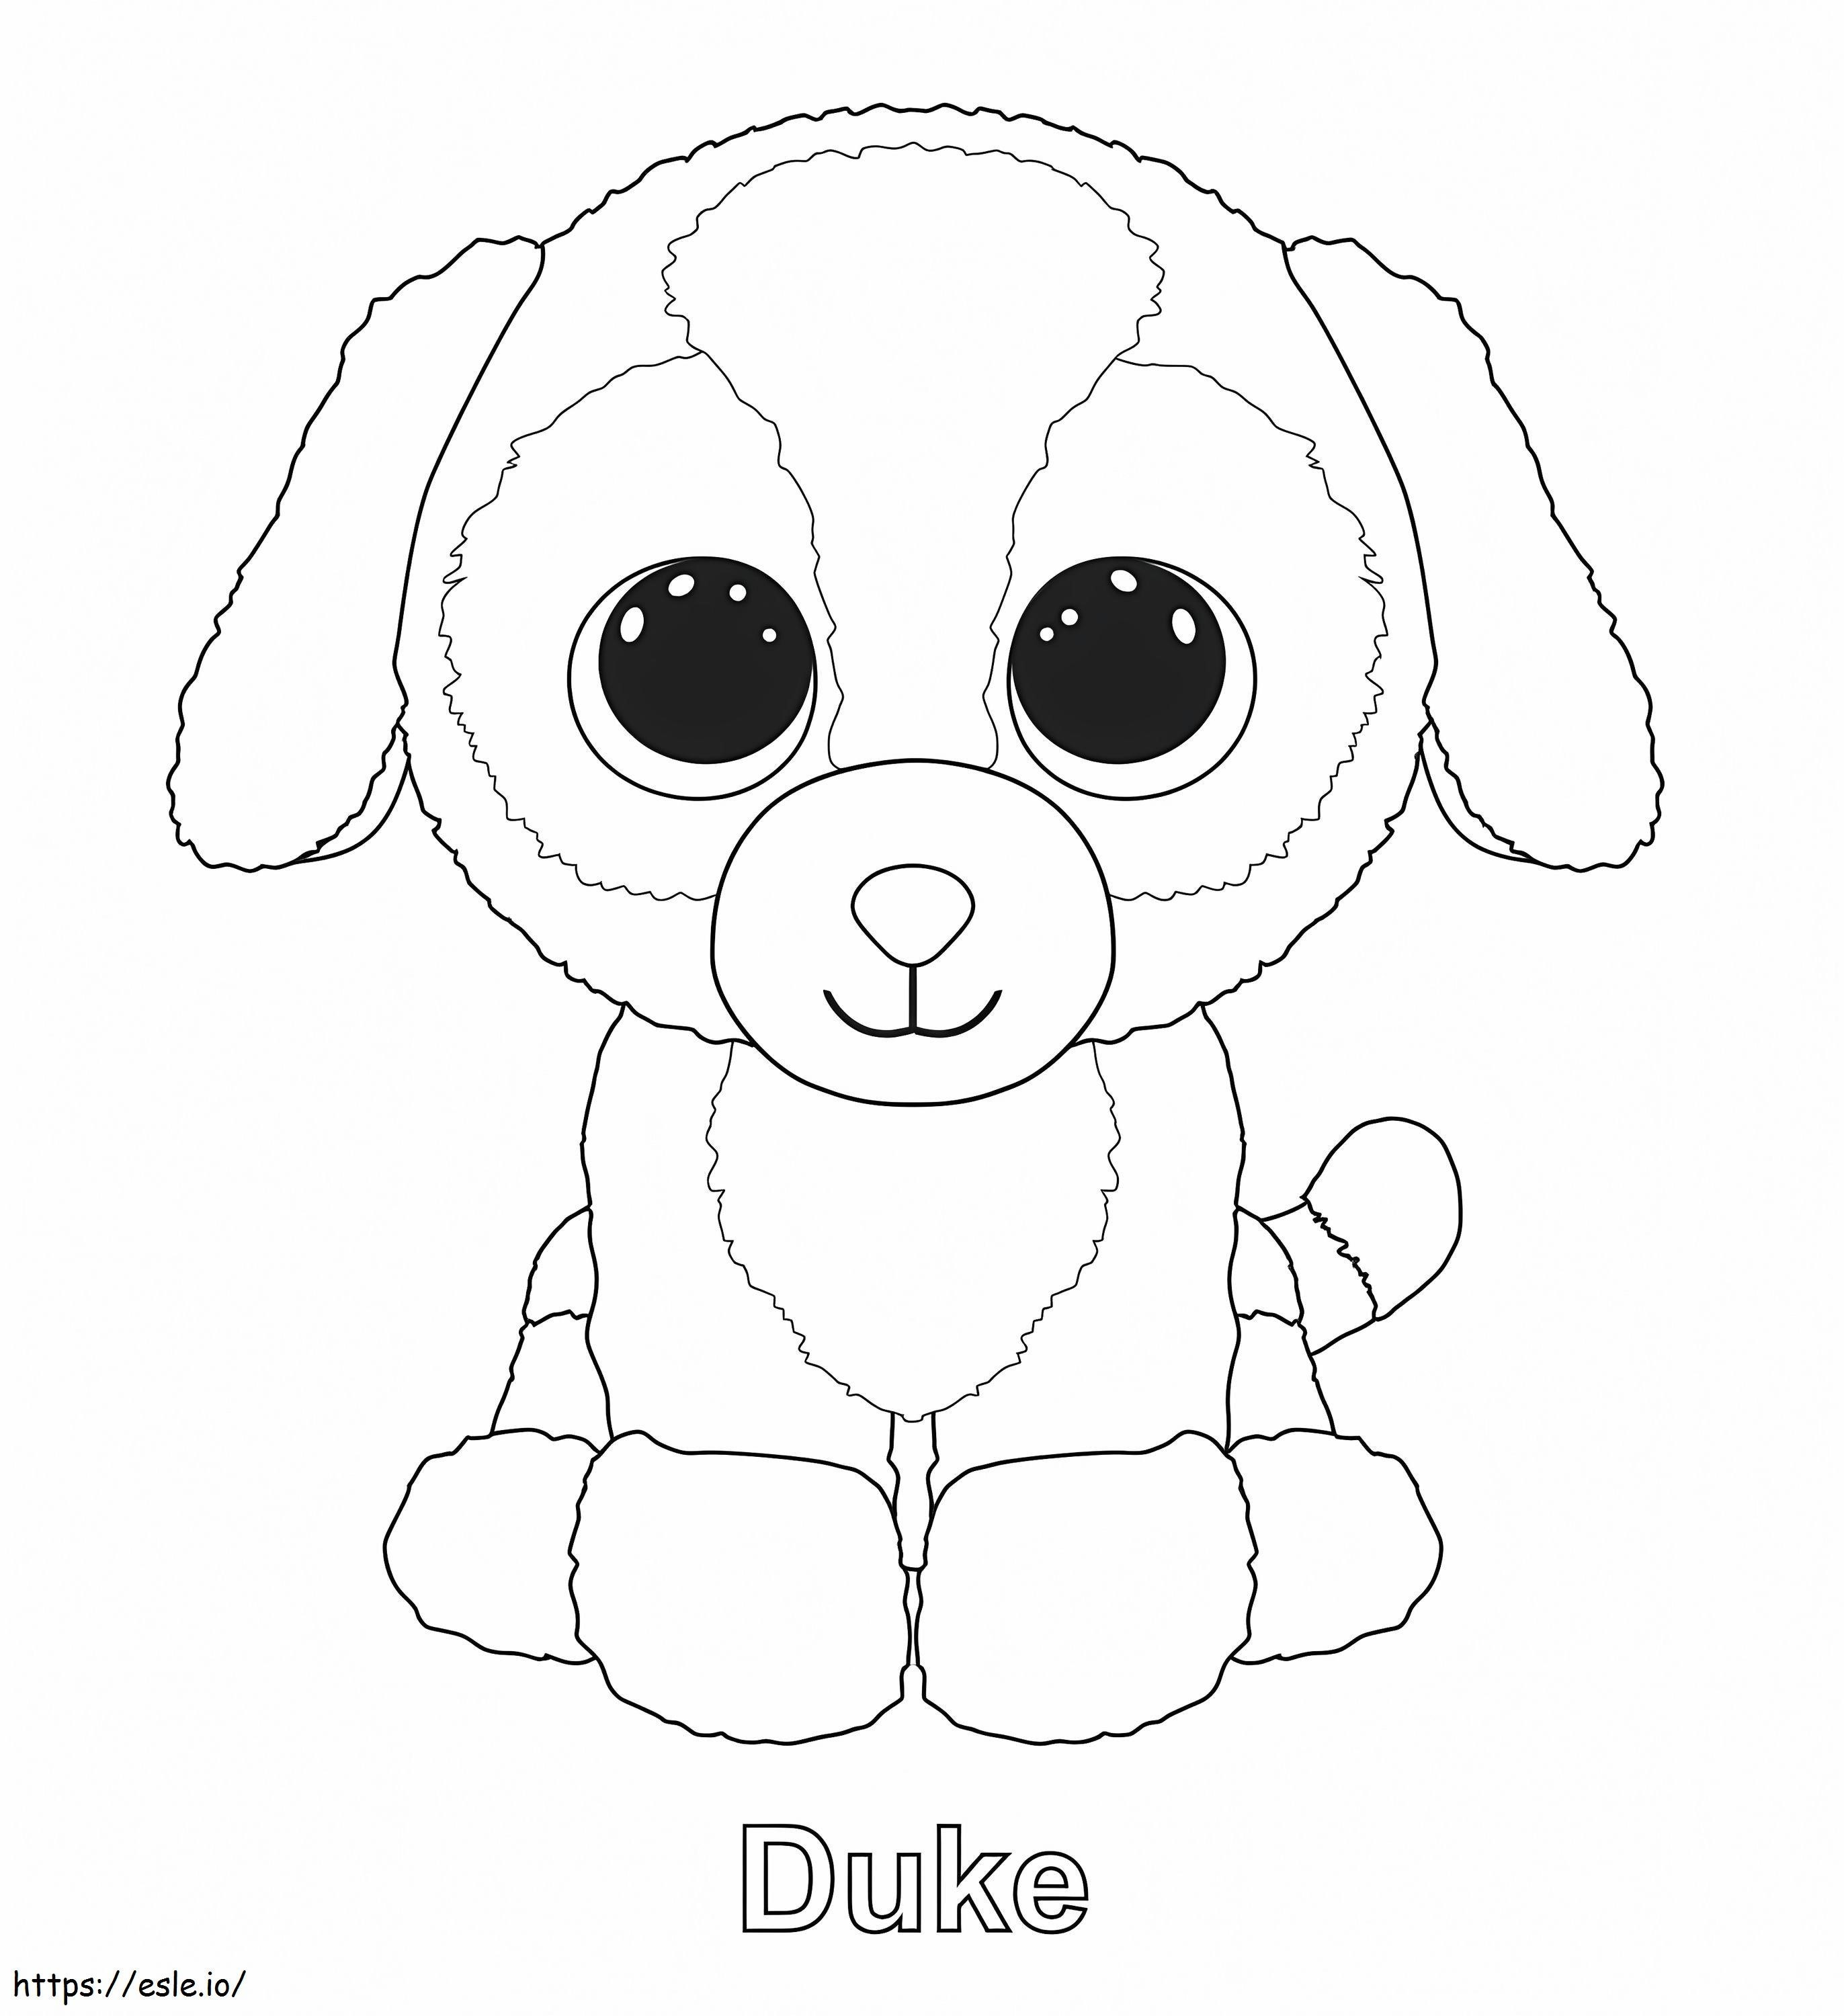 Duke Beanie Boo coloring page